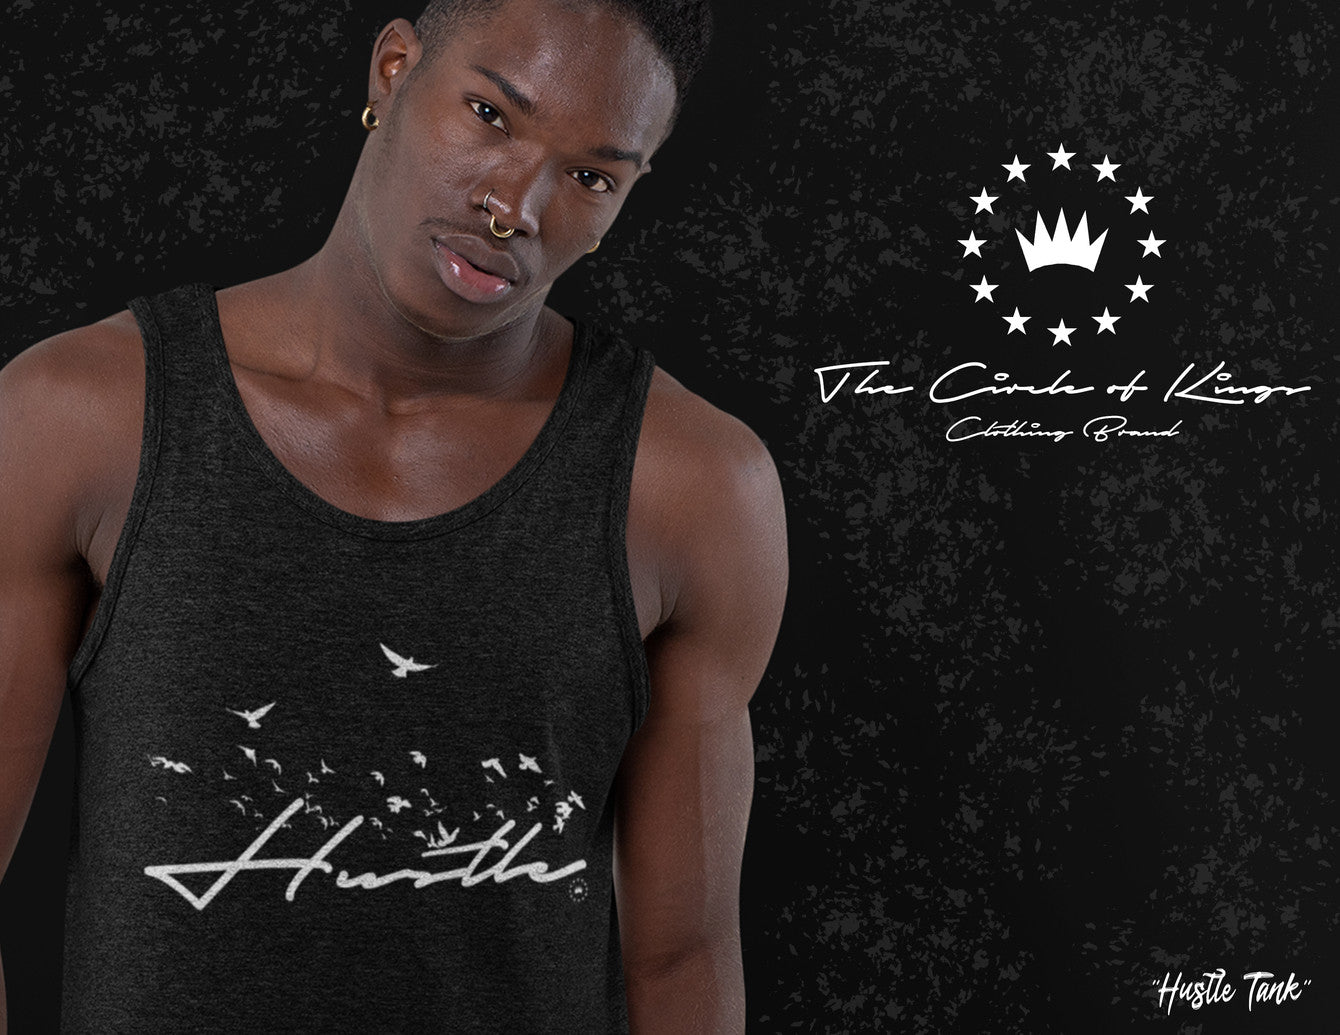 The Circle of Kings Clothing Brand